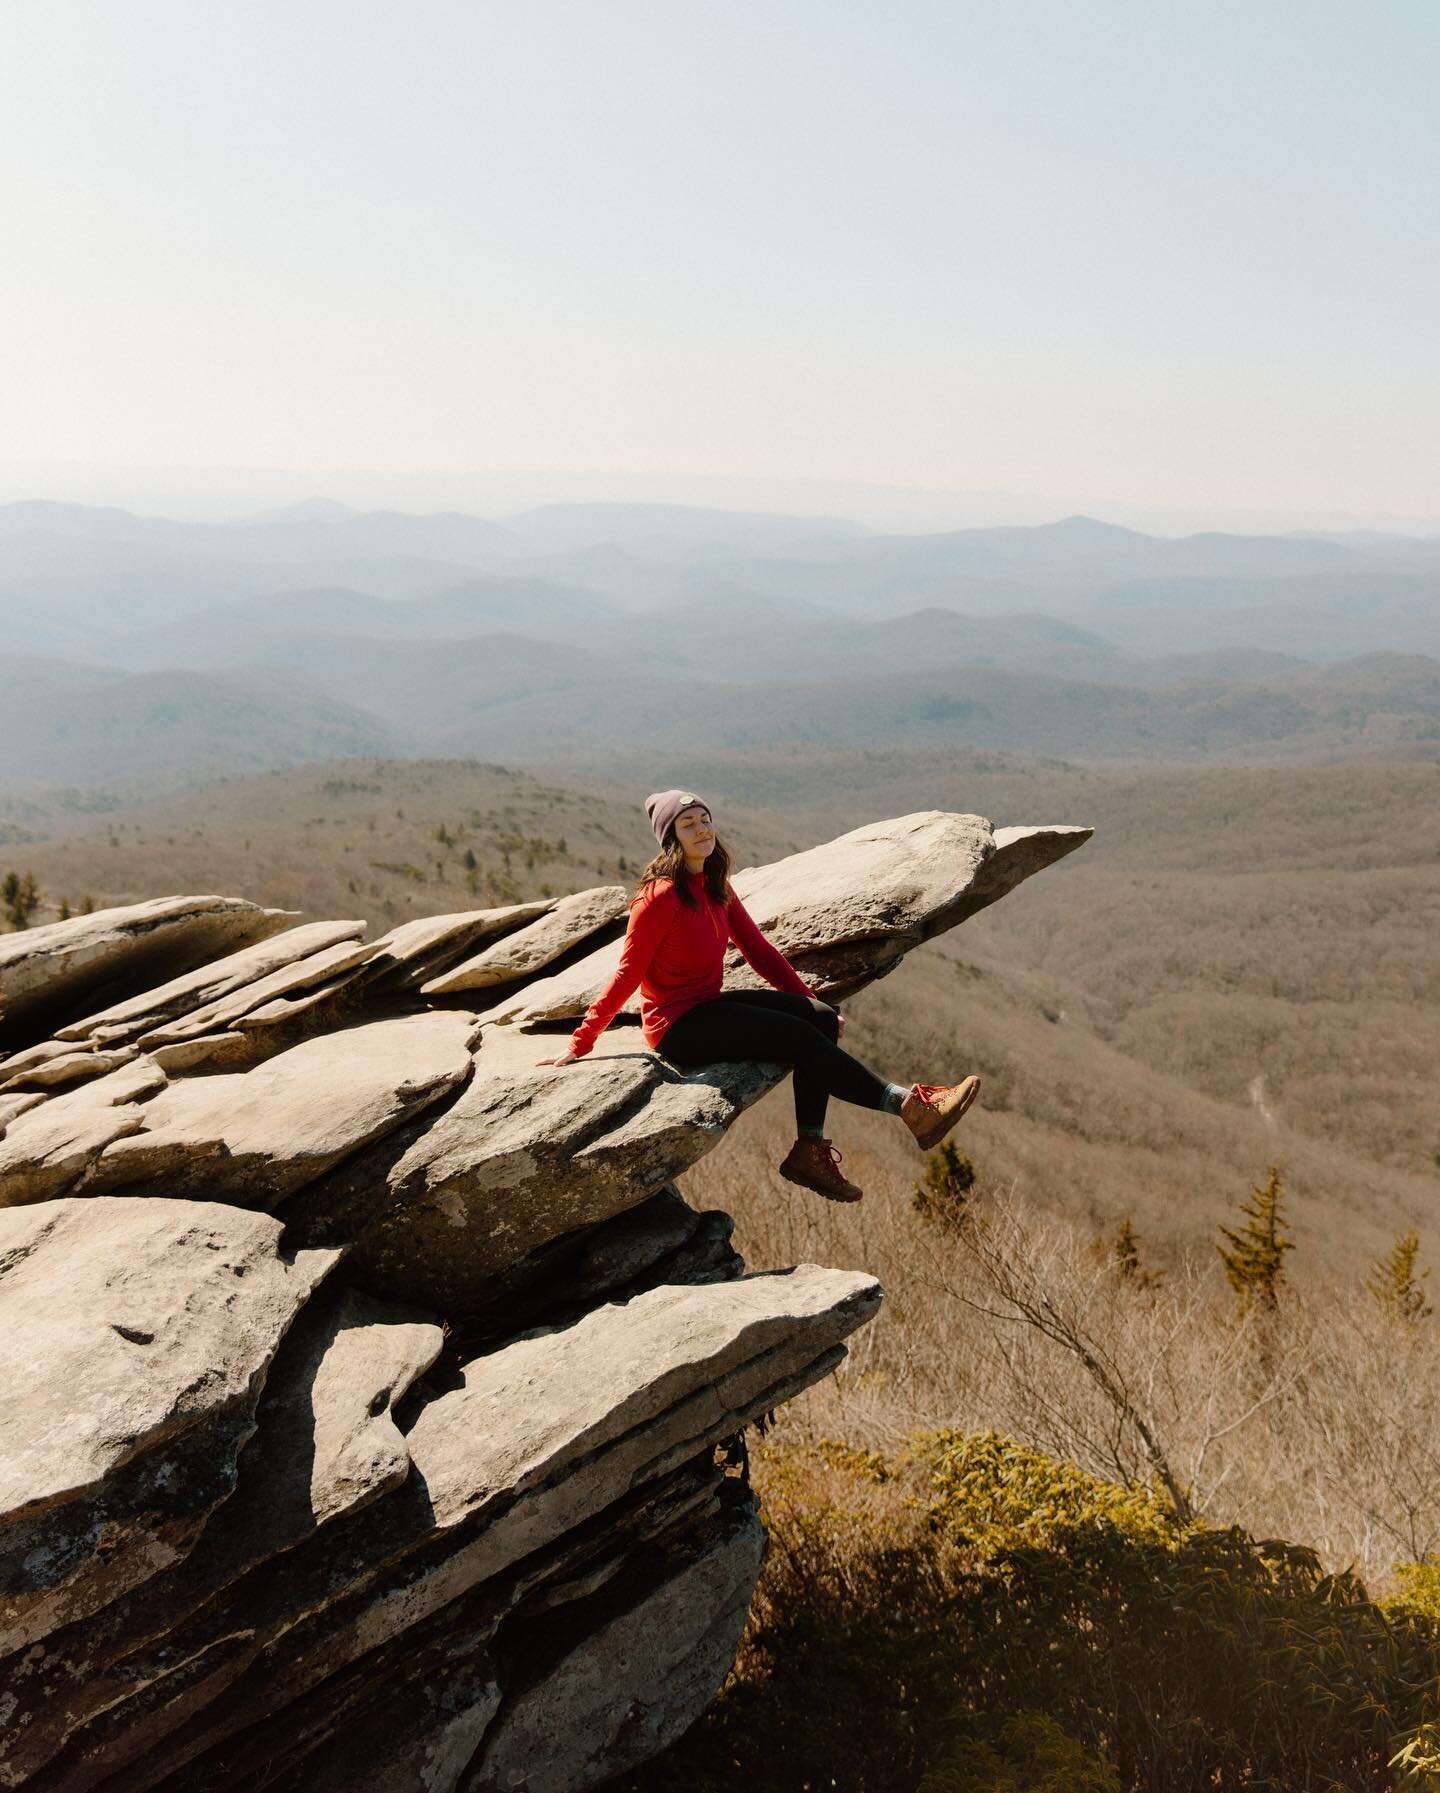 Shoulder season in the Blue Ridge Mountains means having views like this all to yourself ⛰️🤌

I almost bailed on this little solo hike to Rough Ridge the other morning because of how much work was on my plate&hellip;

Sooo glad I didn&rsquo;t, becau